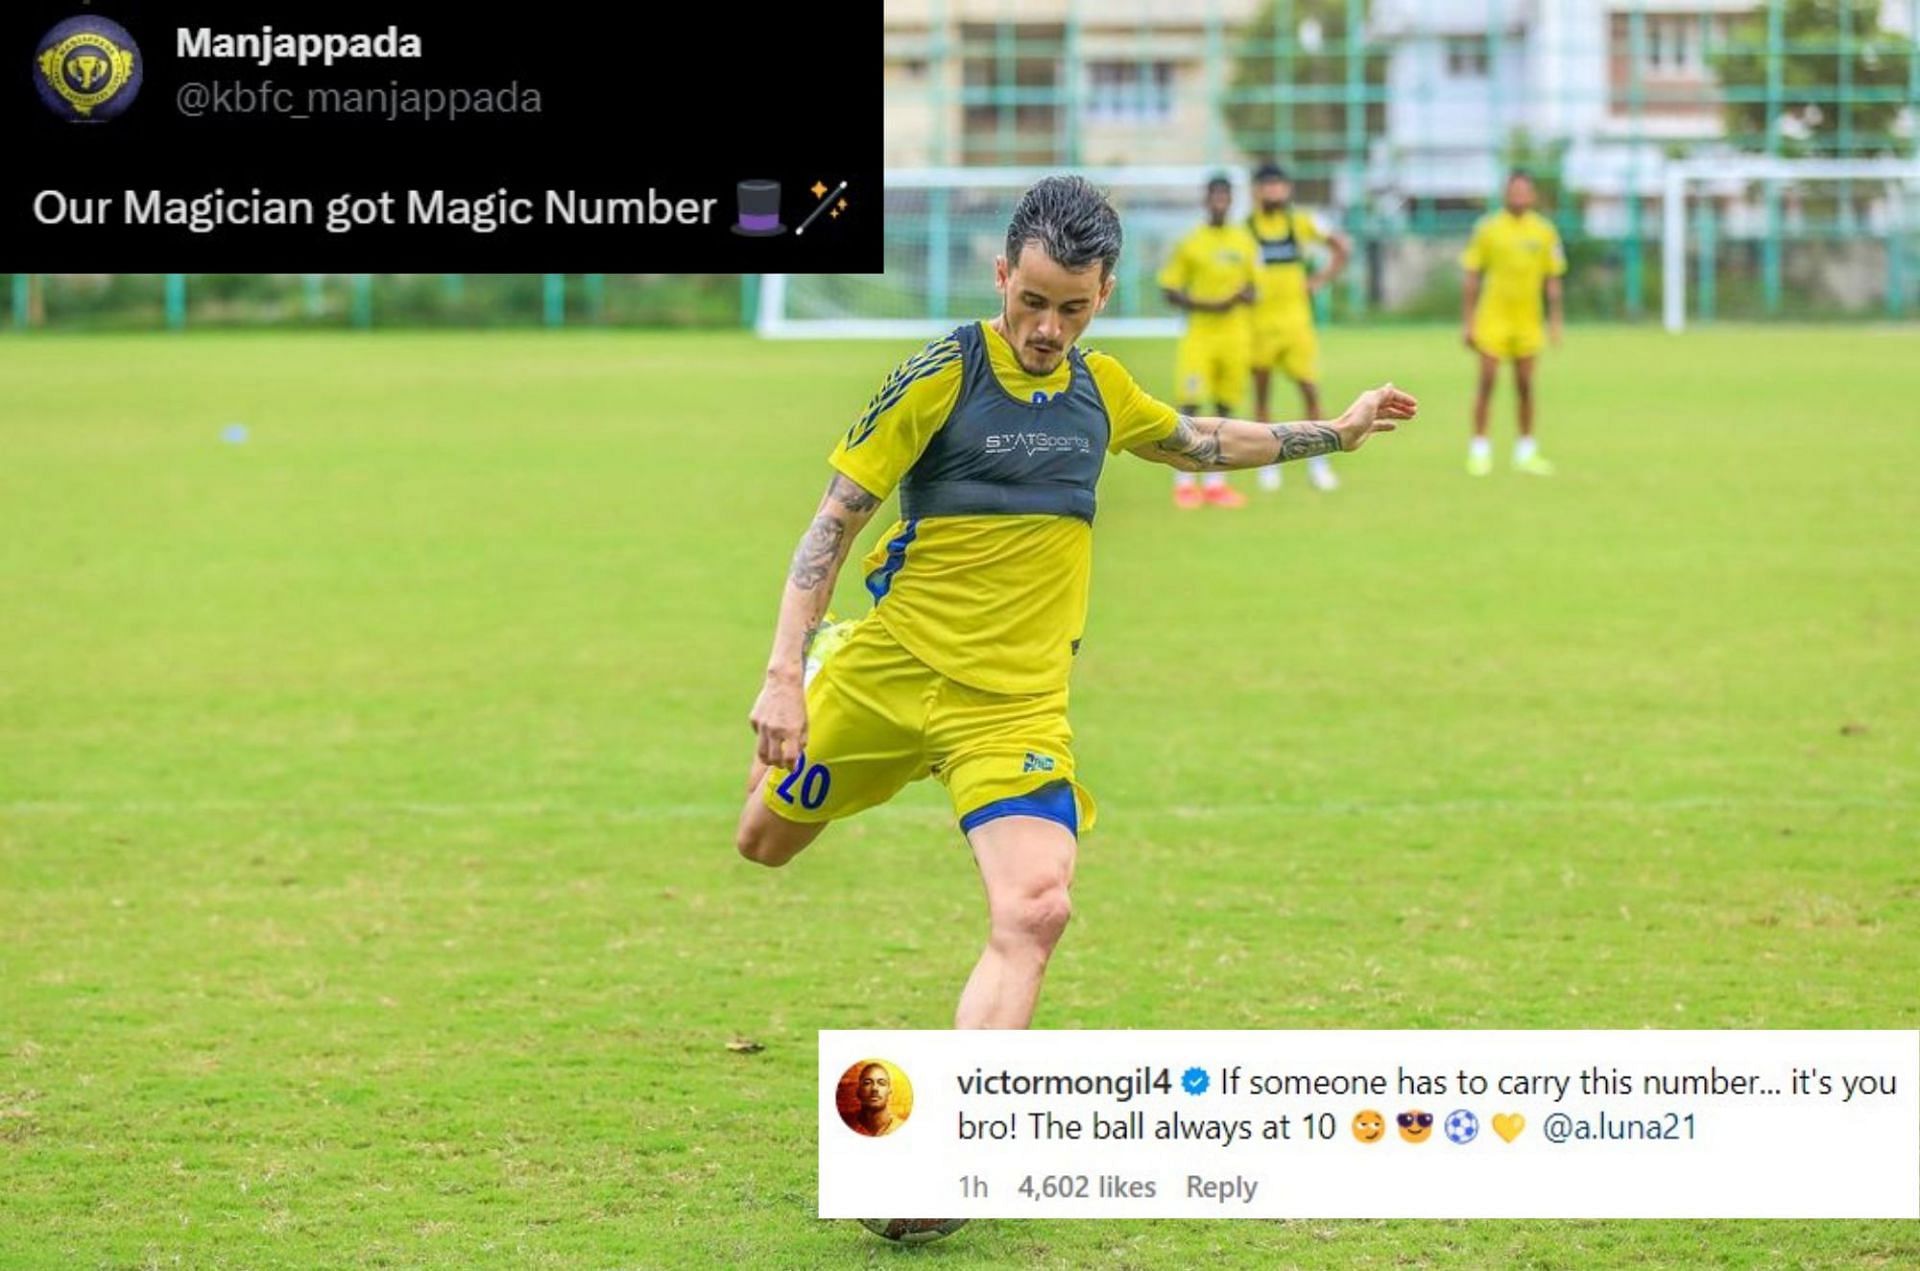 Adrian Luna previously used to wear the No. 20 jersey at Kerala Blasters FC.